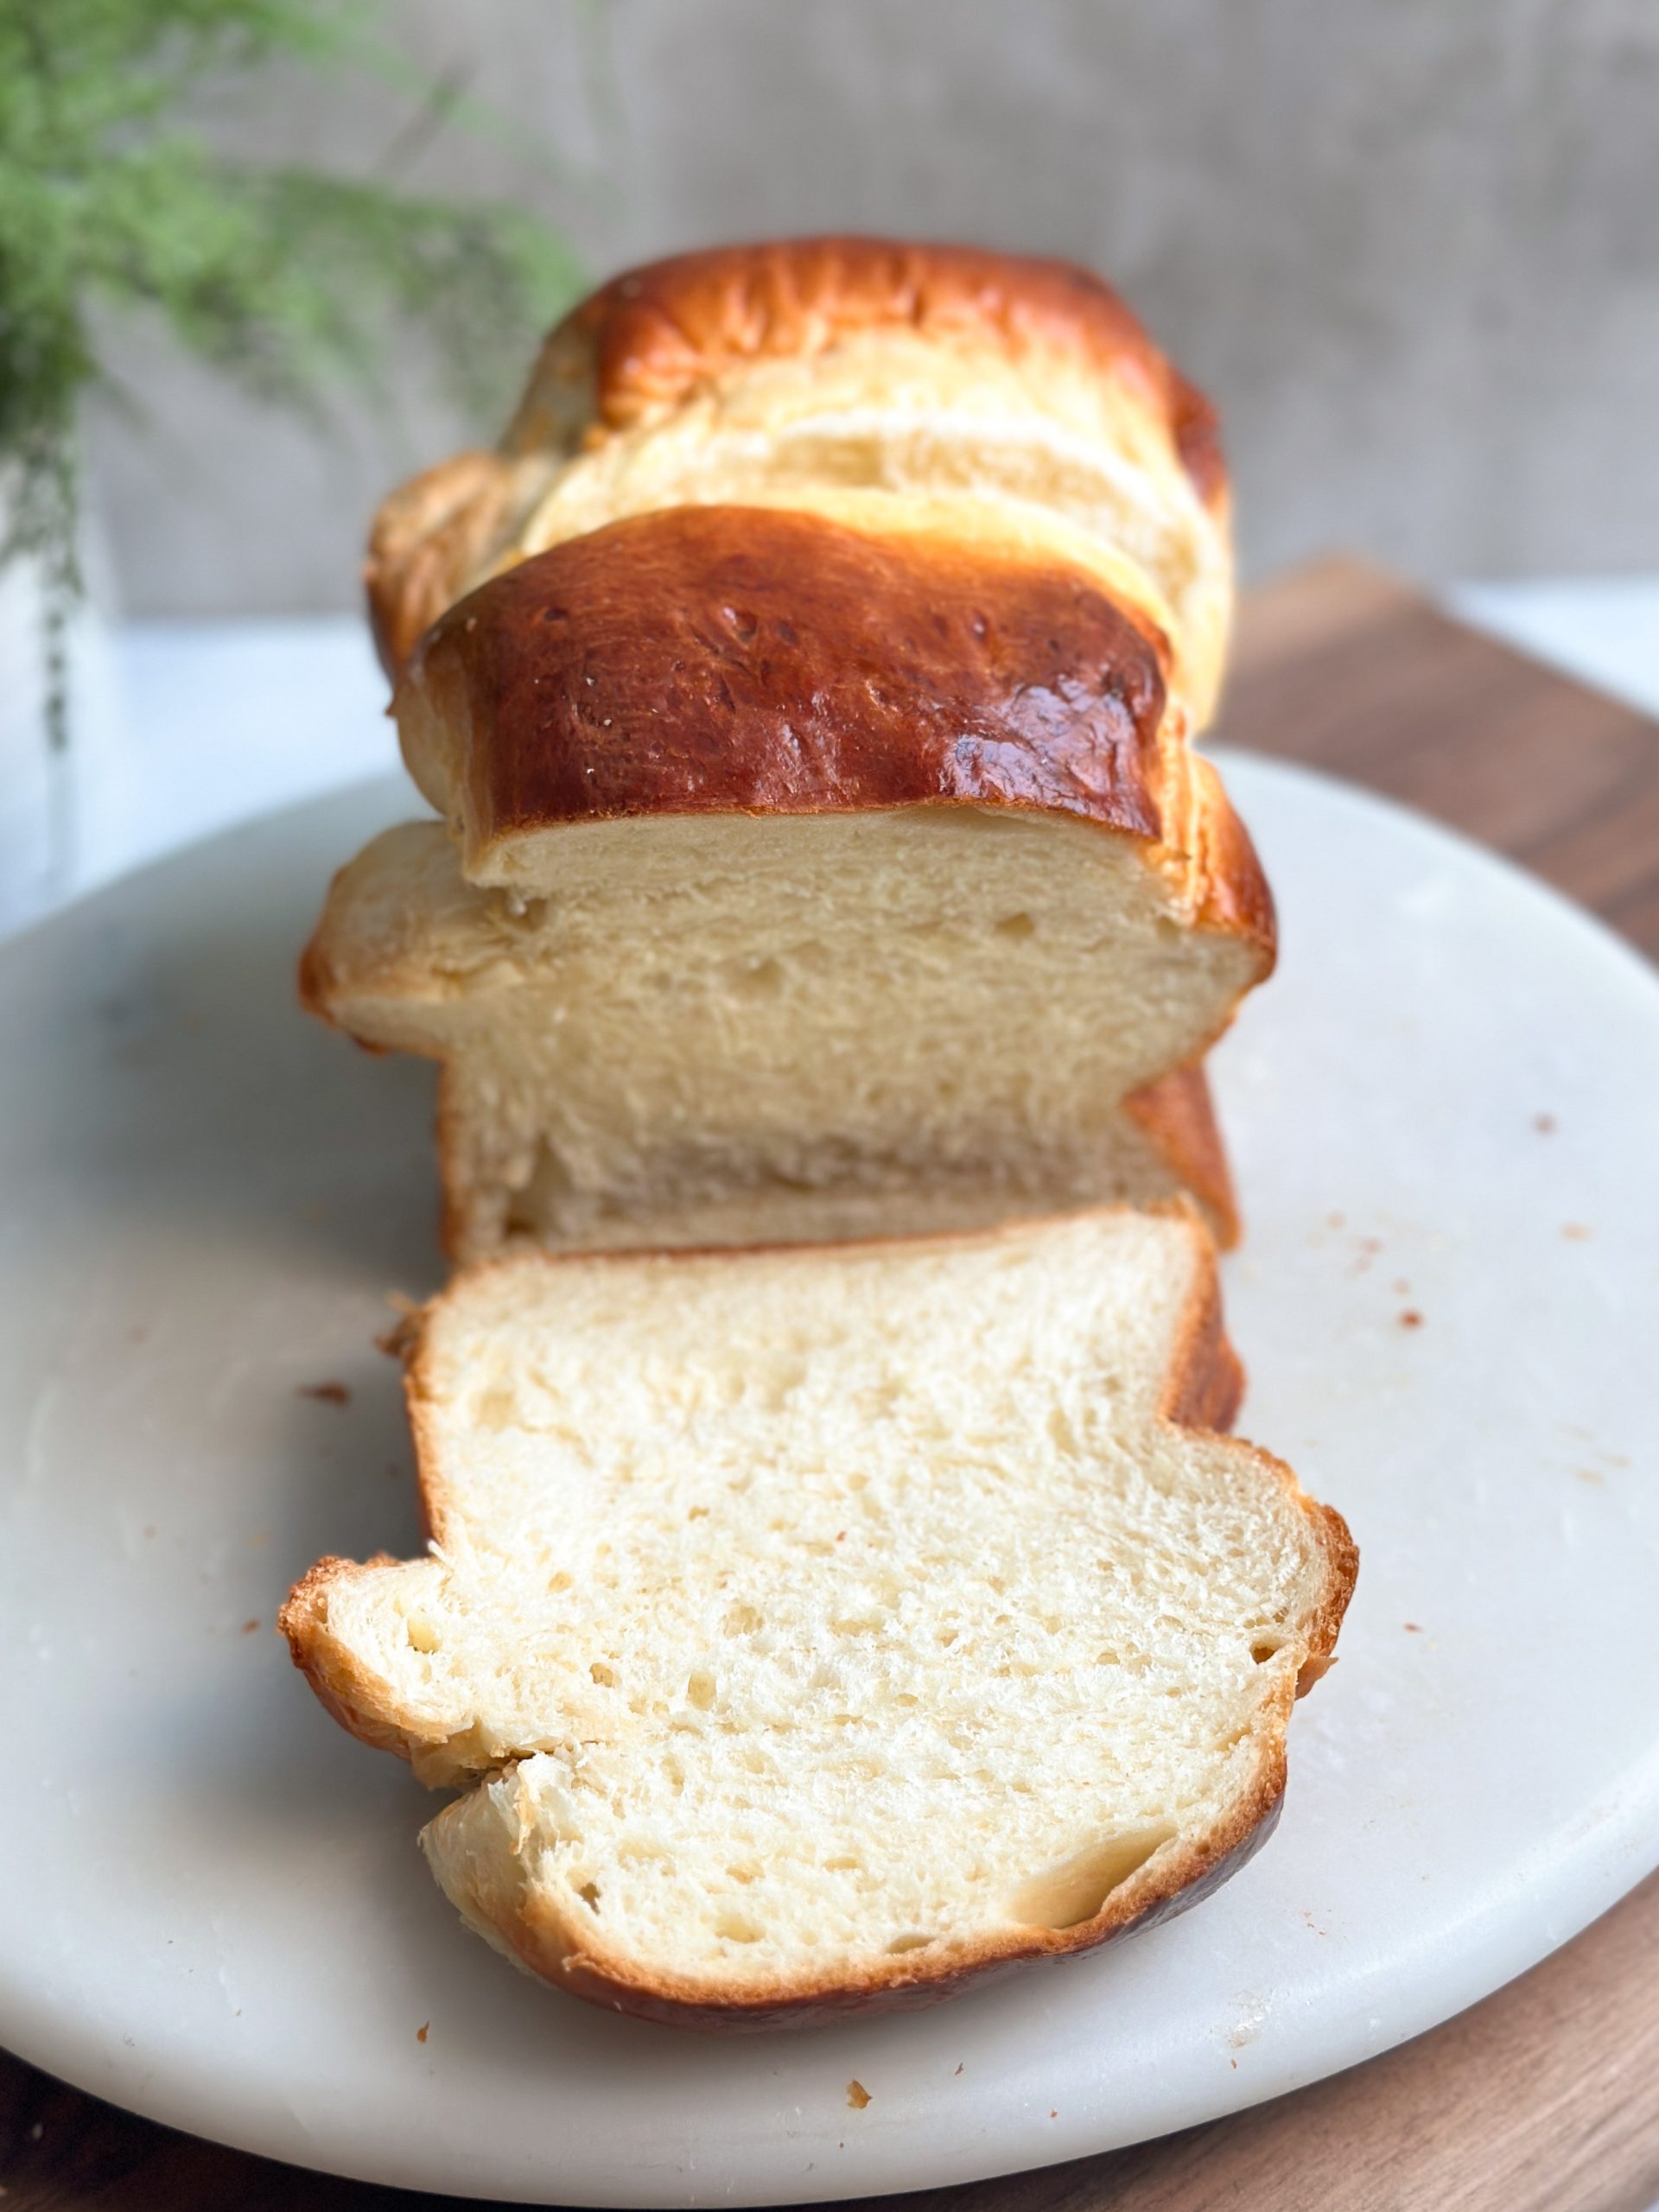 loaf of japanese milk bread sliced into thin slices showing a soft fluffy interior and golden shiny exterior